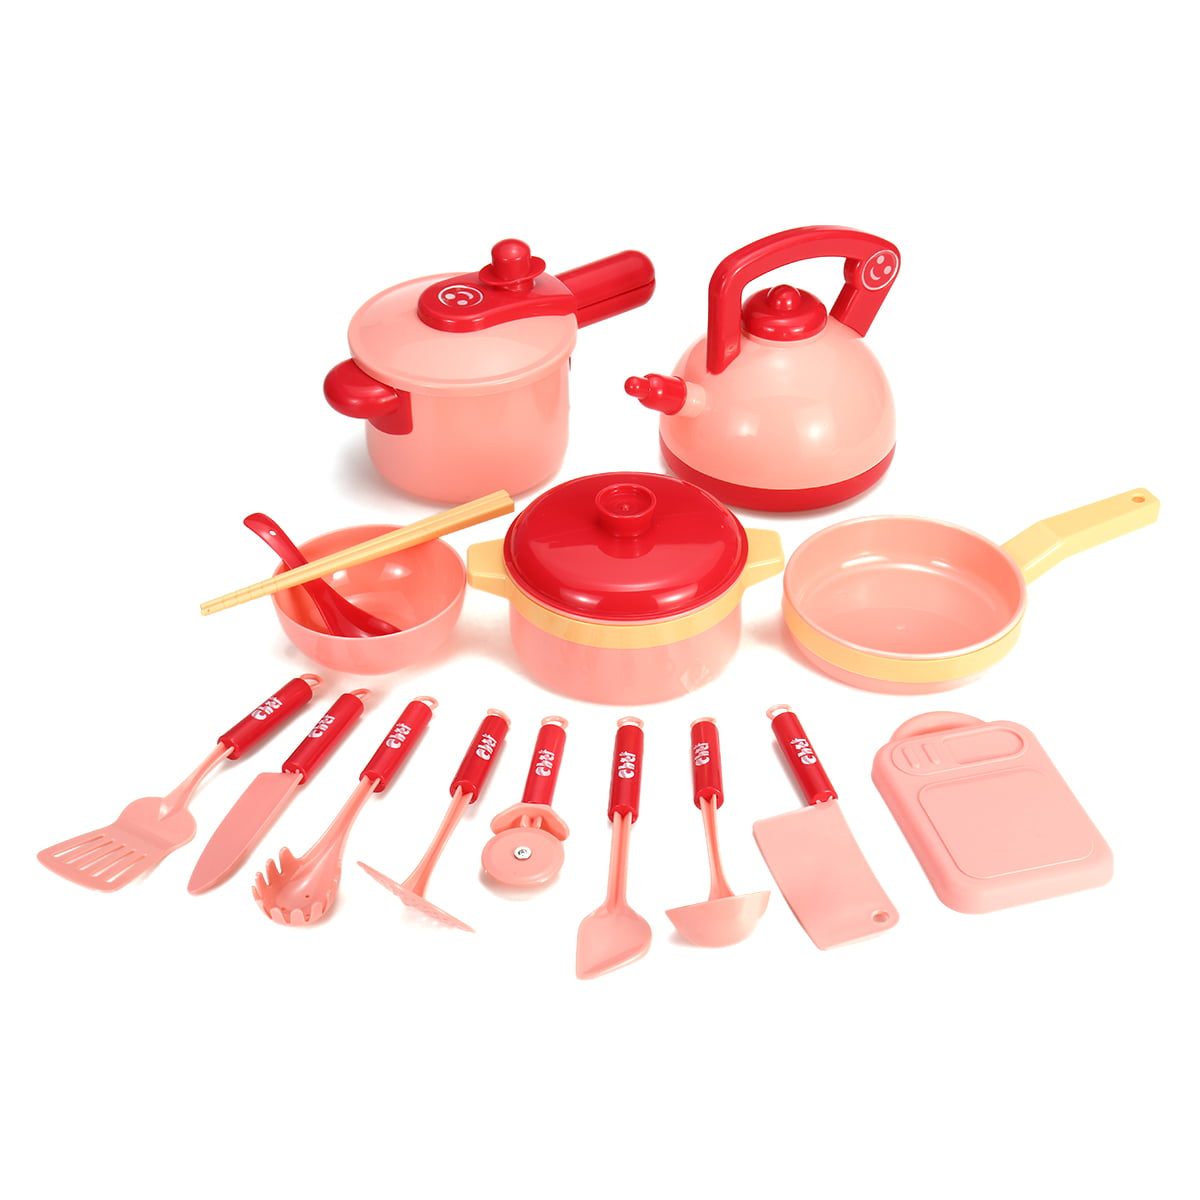 Toy Kitchen Sets,Kids Cooking Pretend Toys,Play Cooking Set, Cookware Pots and Pans Playset,Mini